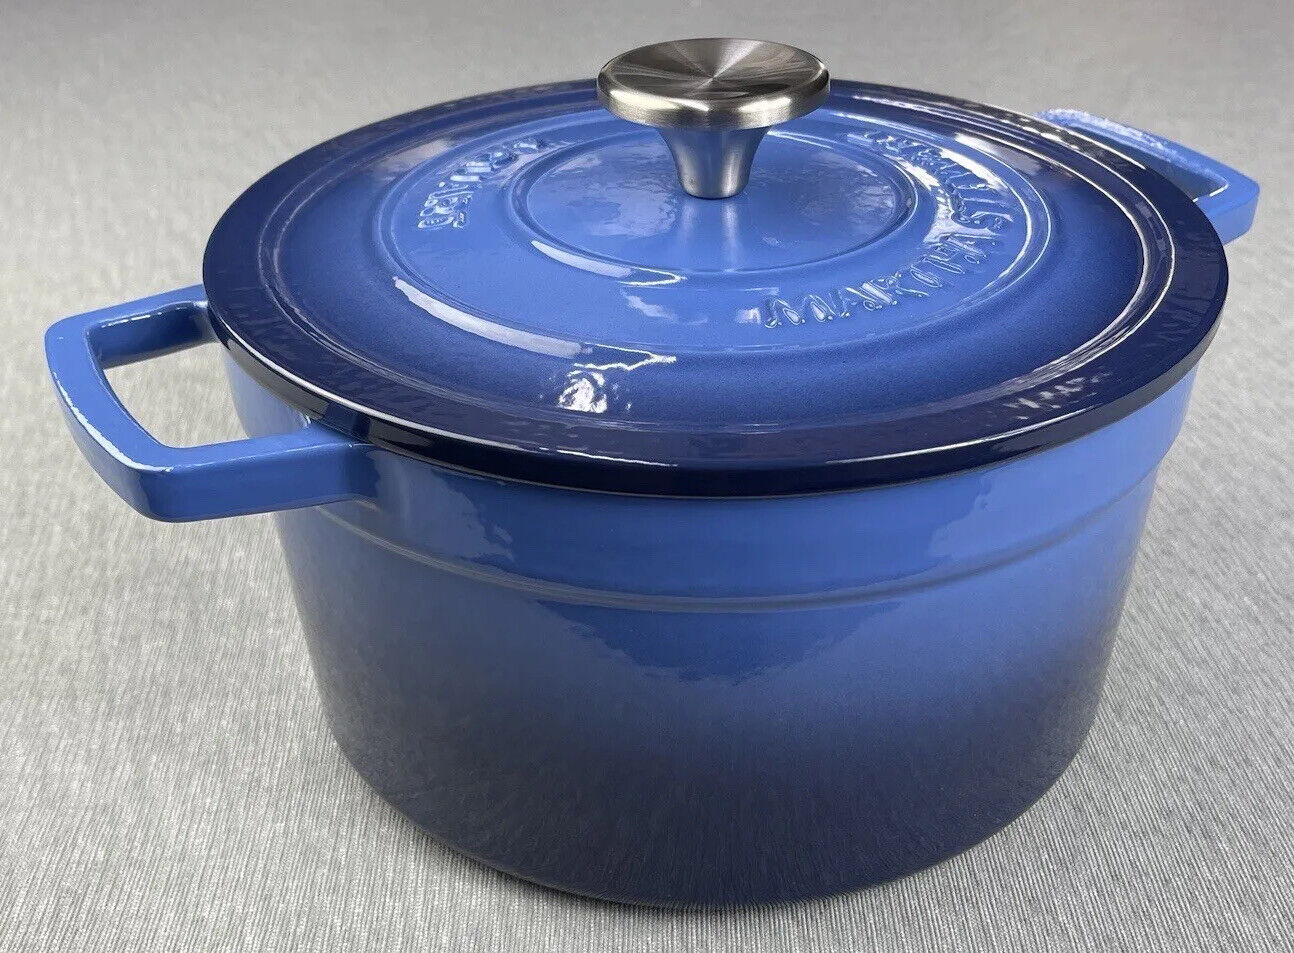 MARTHA STEWART COLLECTOR'S ENAMELED CAST IRON 4 QT ROUND COVERED DUTCH OVEN